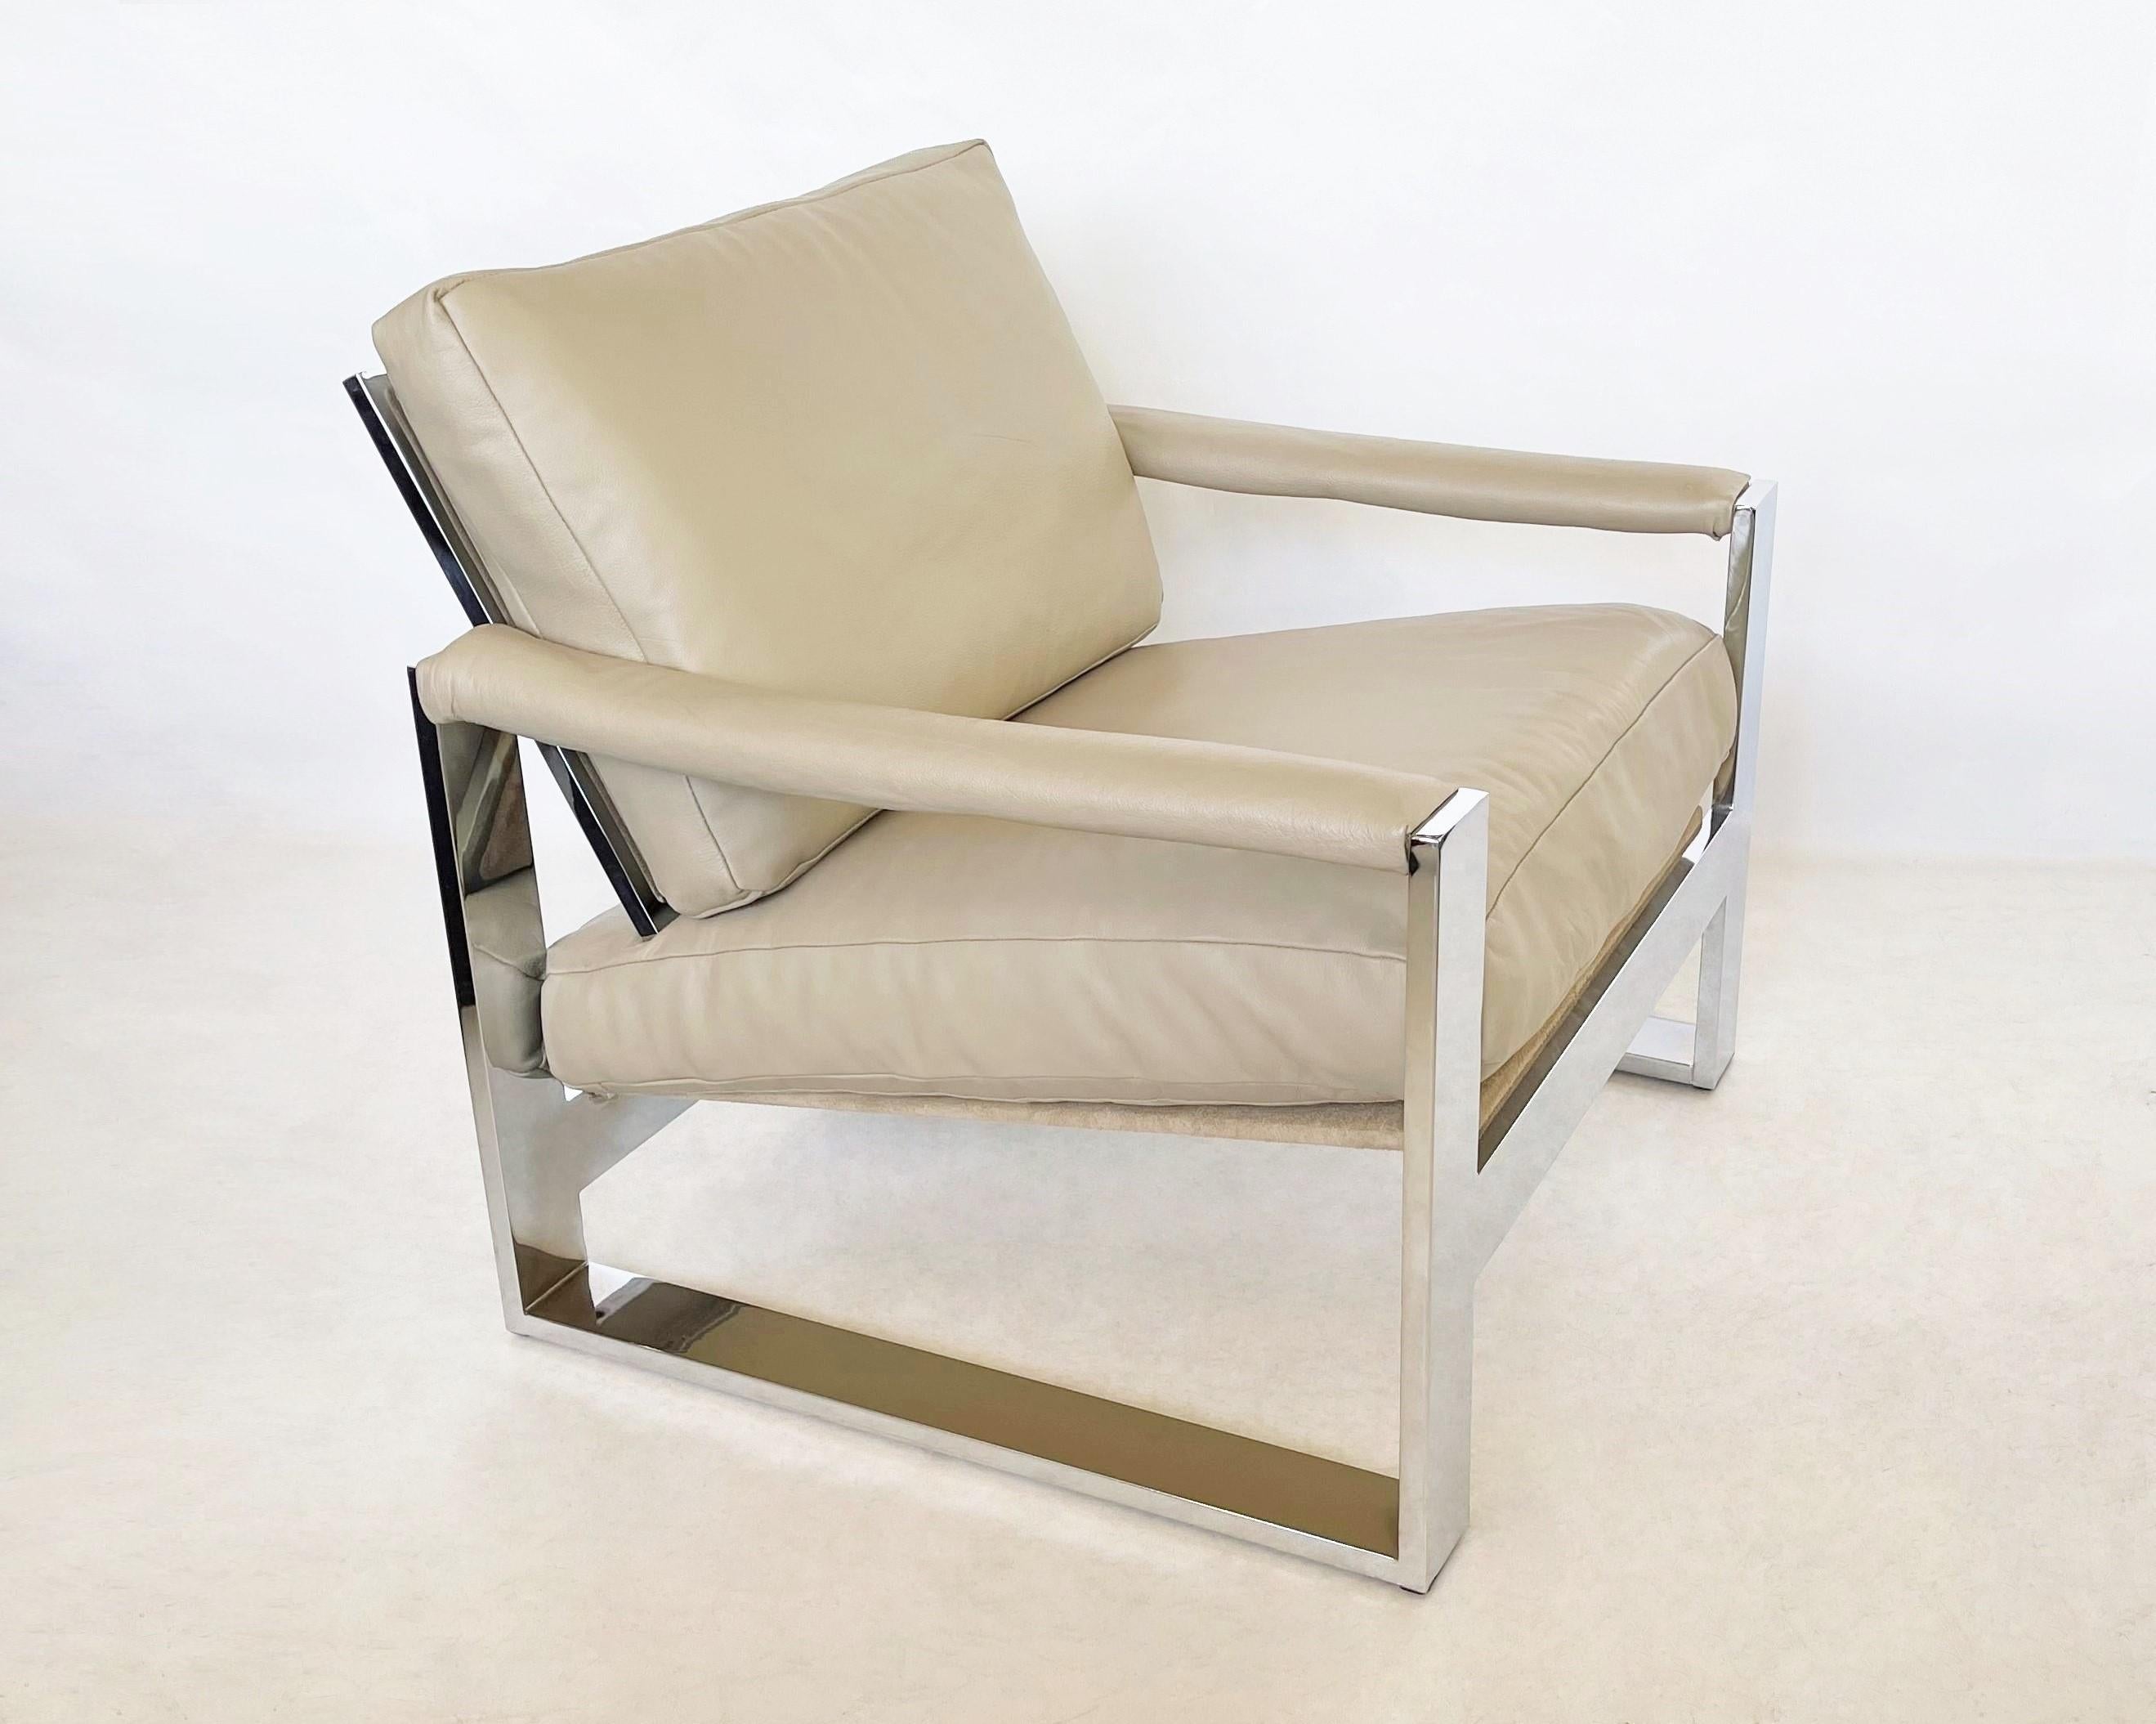 Glamorous, over-scaled, streamlined pair of chairs from a limited production collection designed Milo Baughman Classic for Thayer Coggin. Originally designed in 1972, these chairs are uniquely designed with padded arms and luxurious seating and back